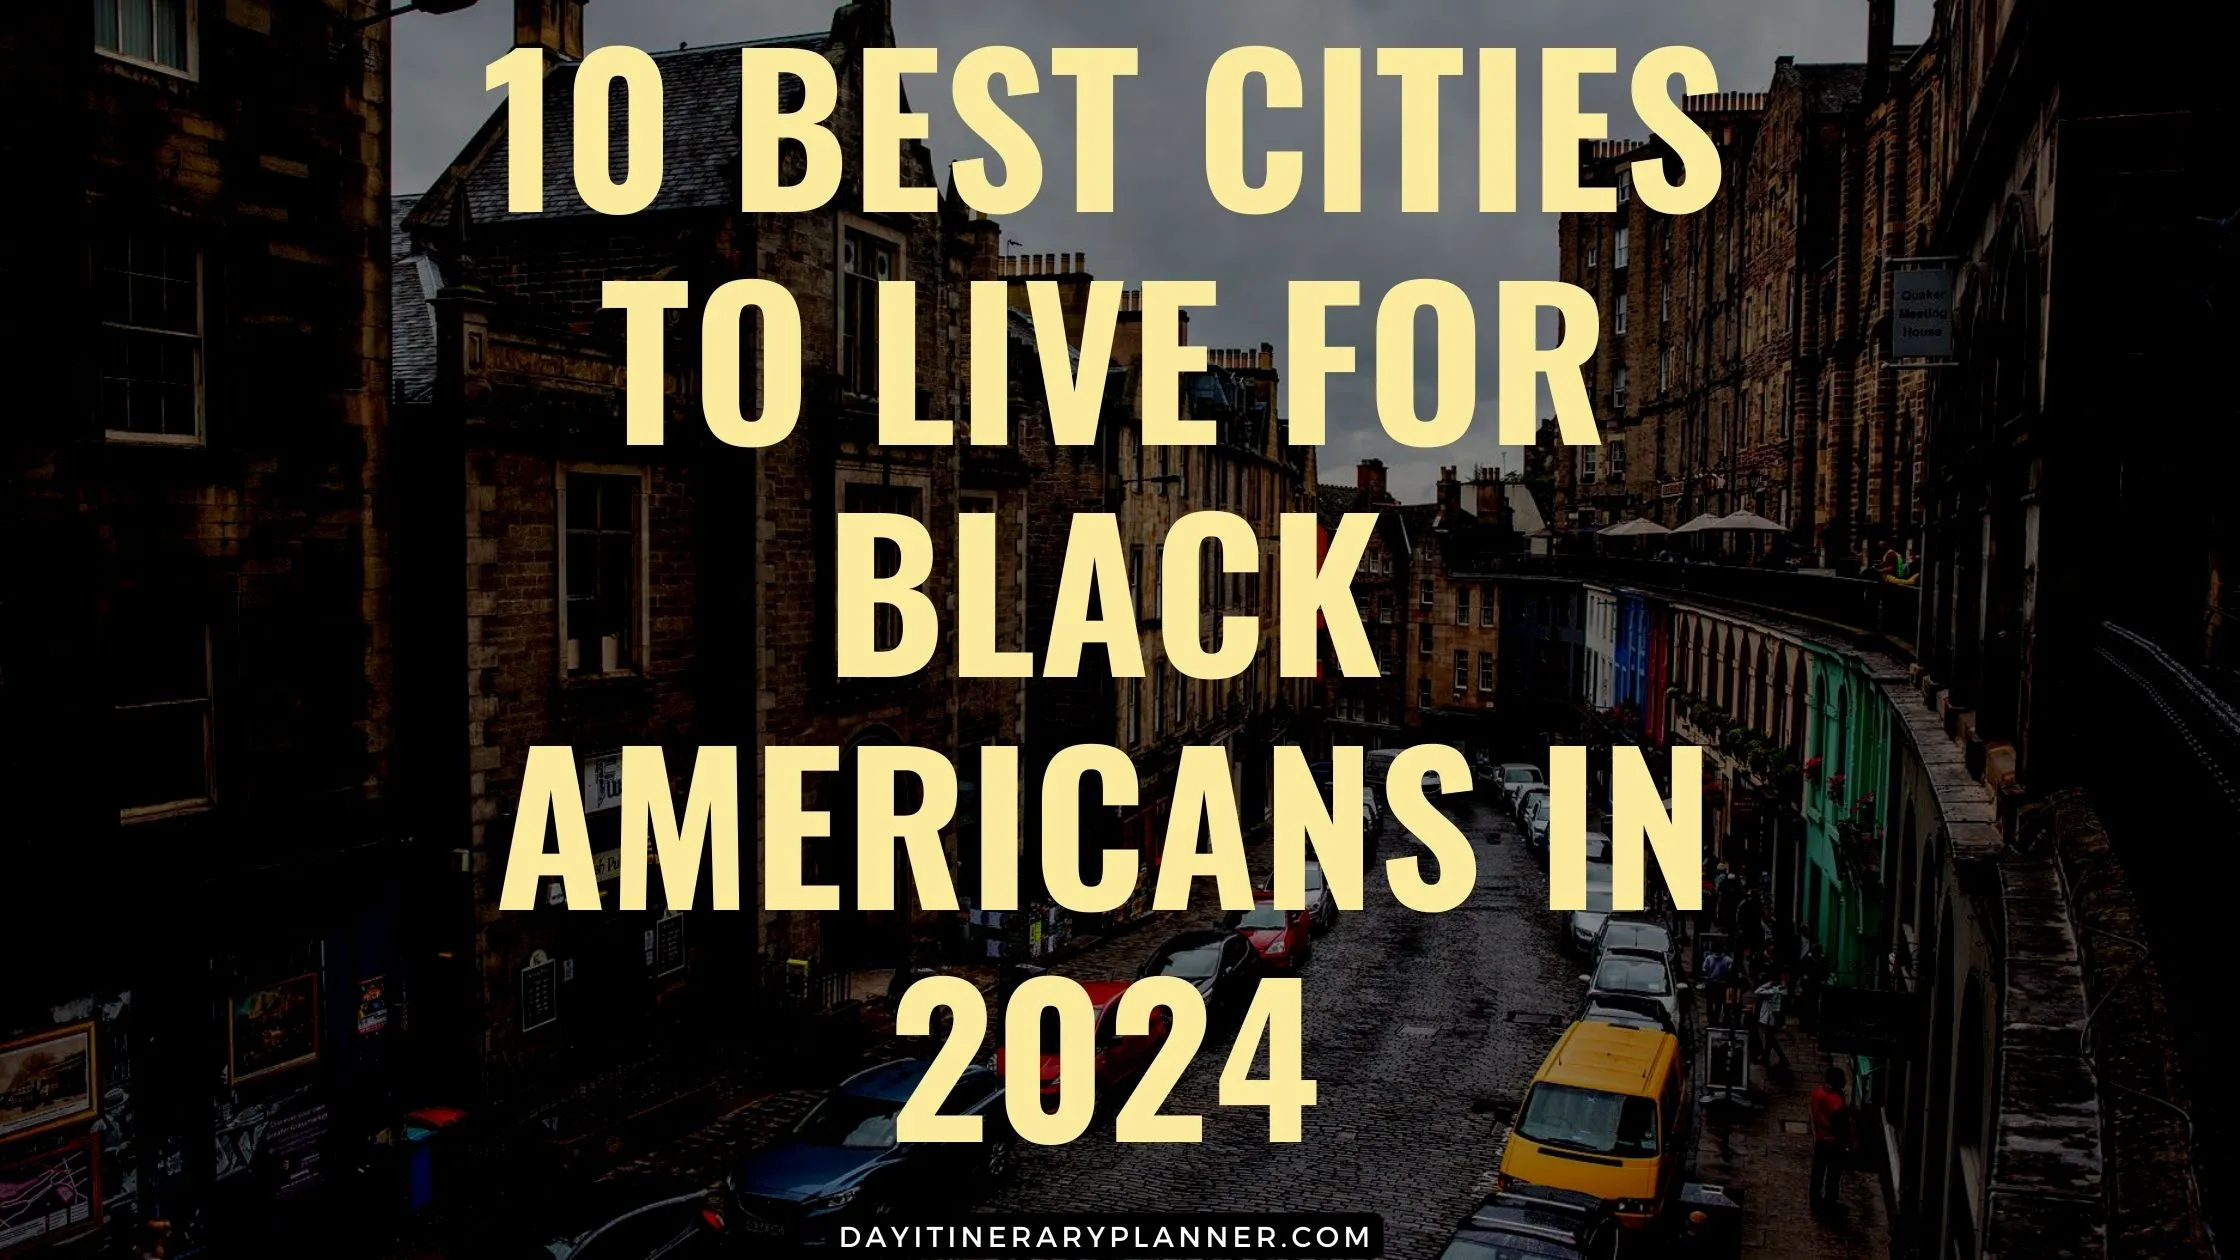 10-Best-Cities-to-Live-for-Black-Americans-in-2024